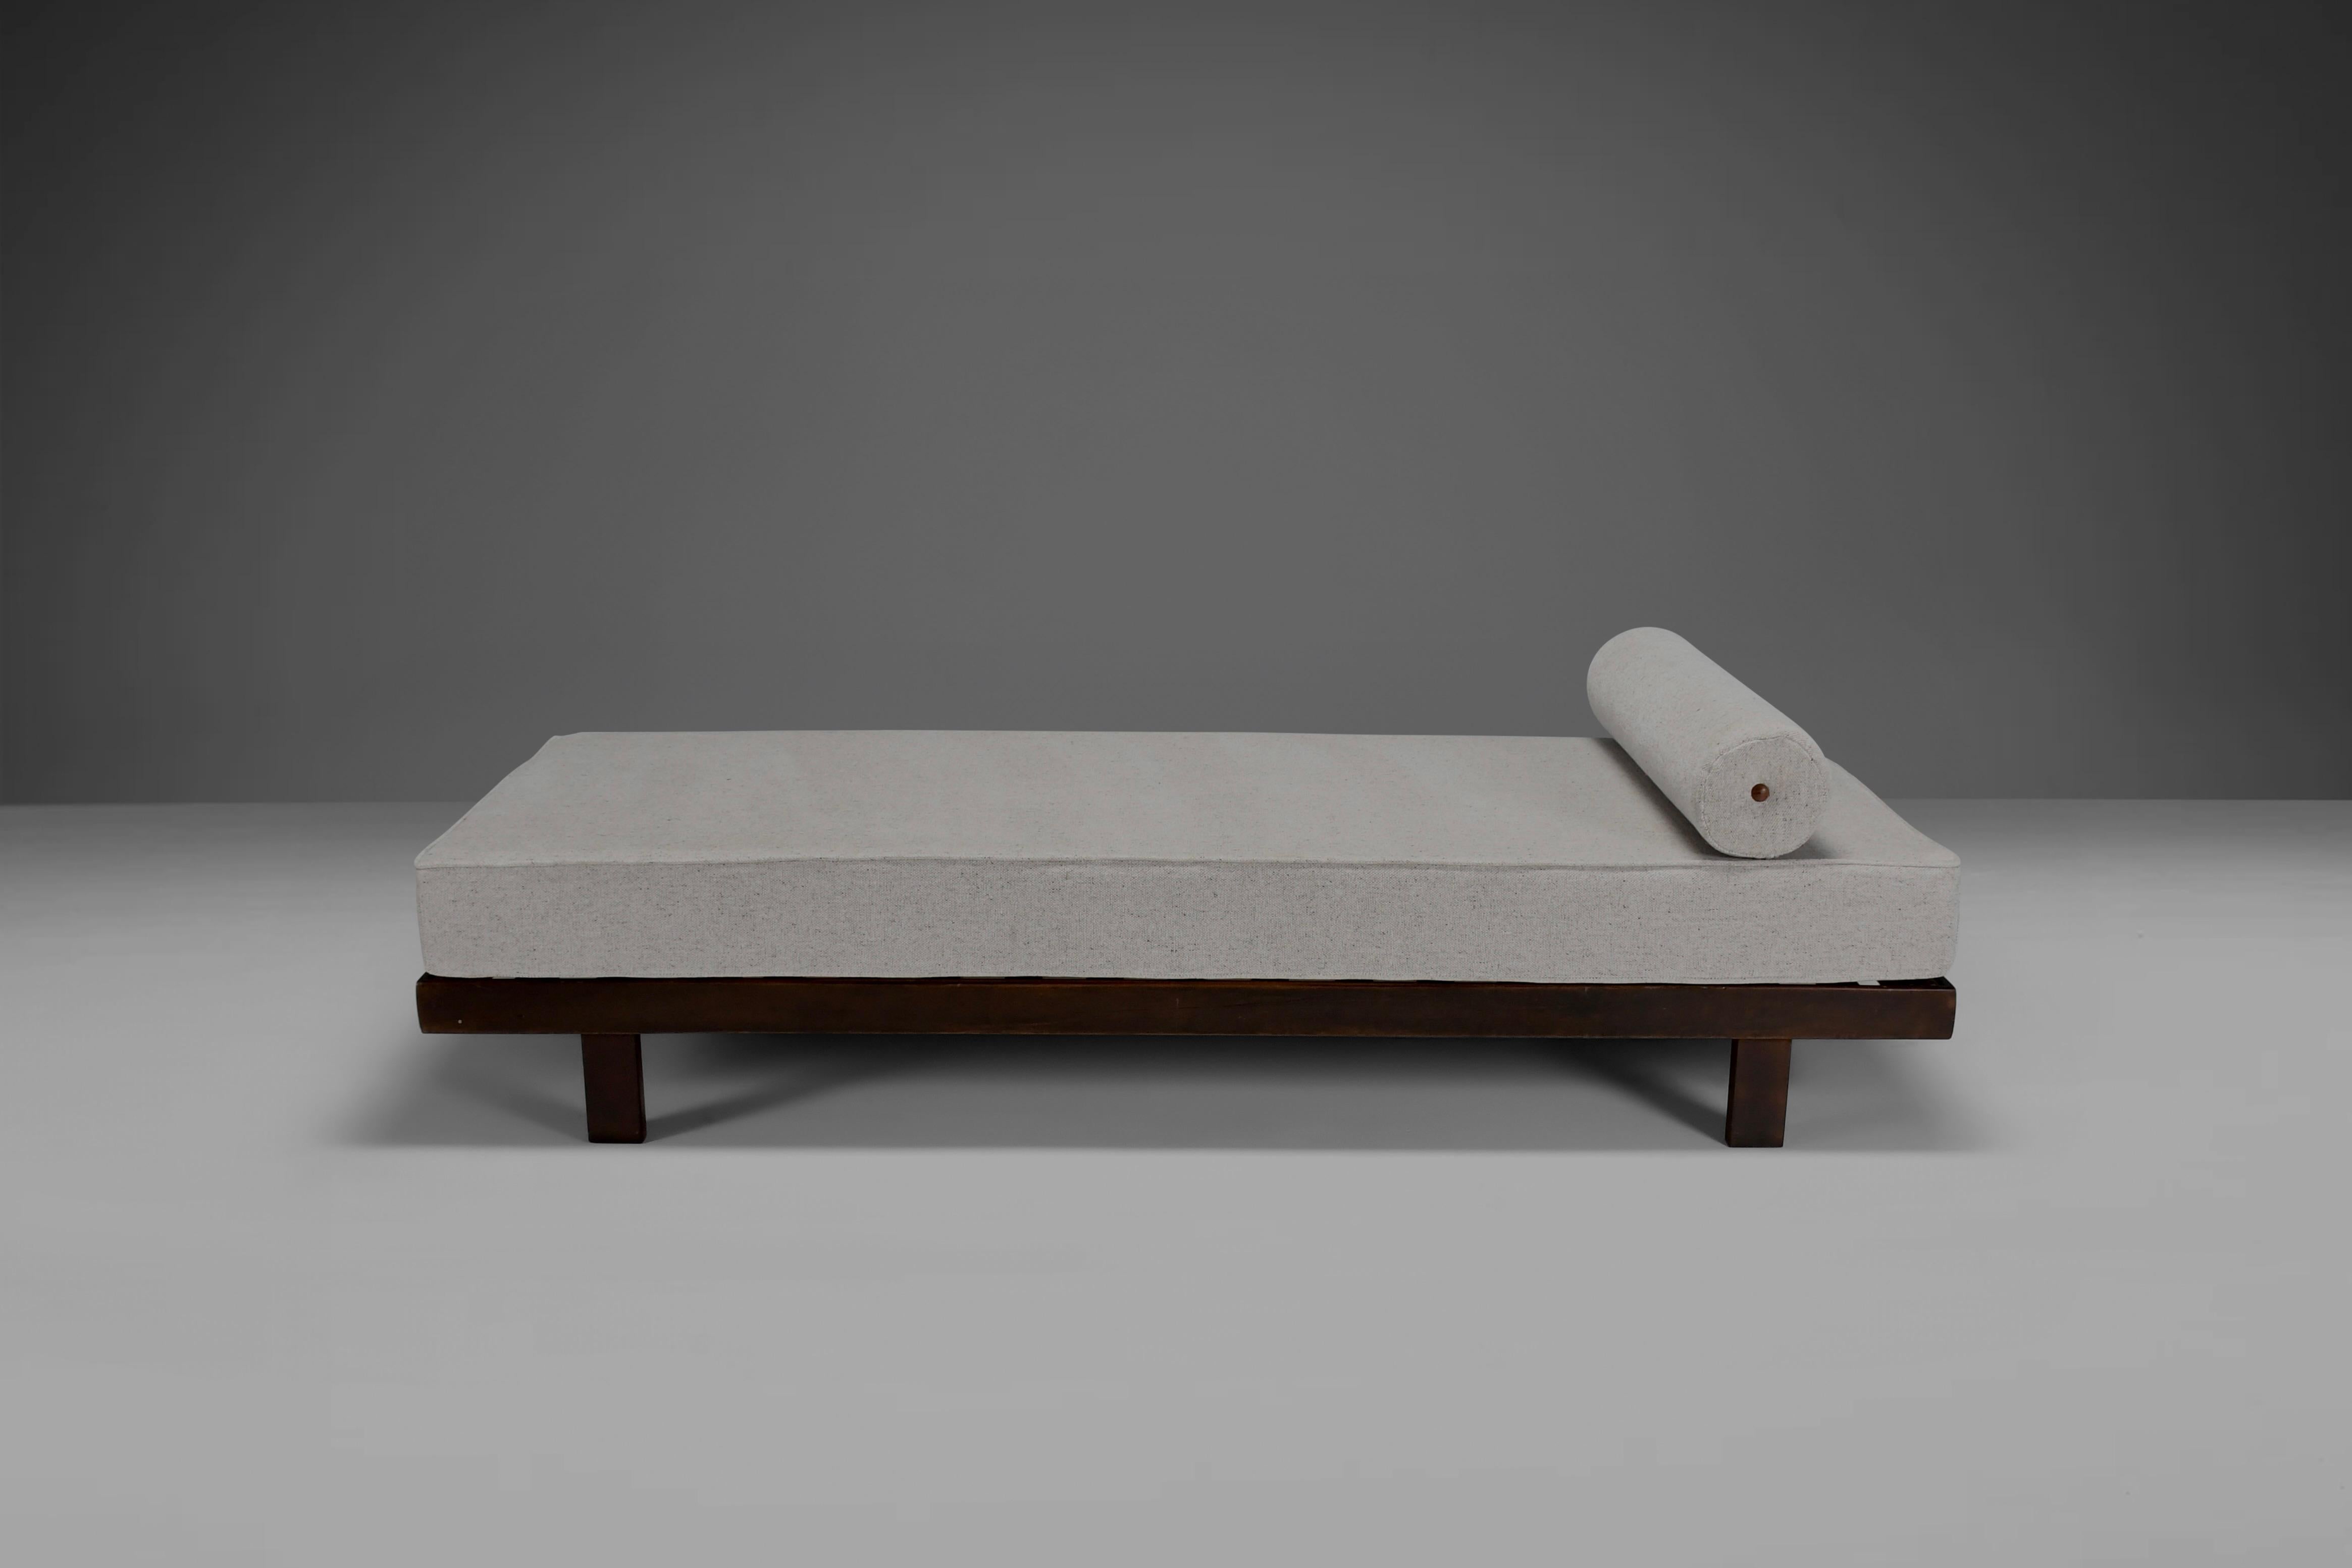 20th Century Minimalist Daybed by Jorge Zalszupin for L’atelier, Brazil, 1959 '2 Available' For Sale